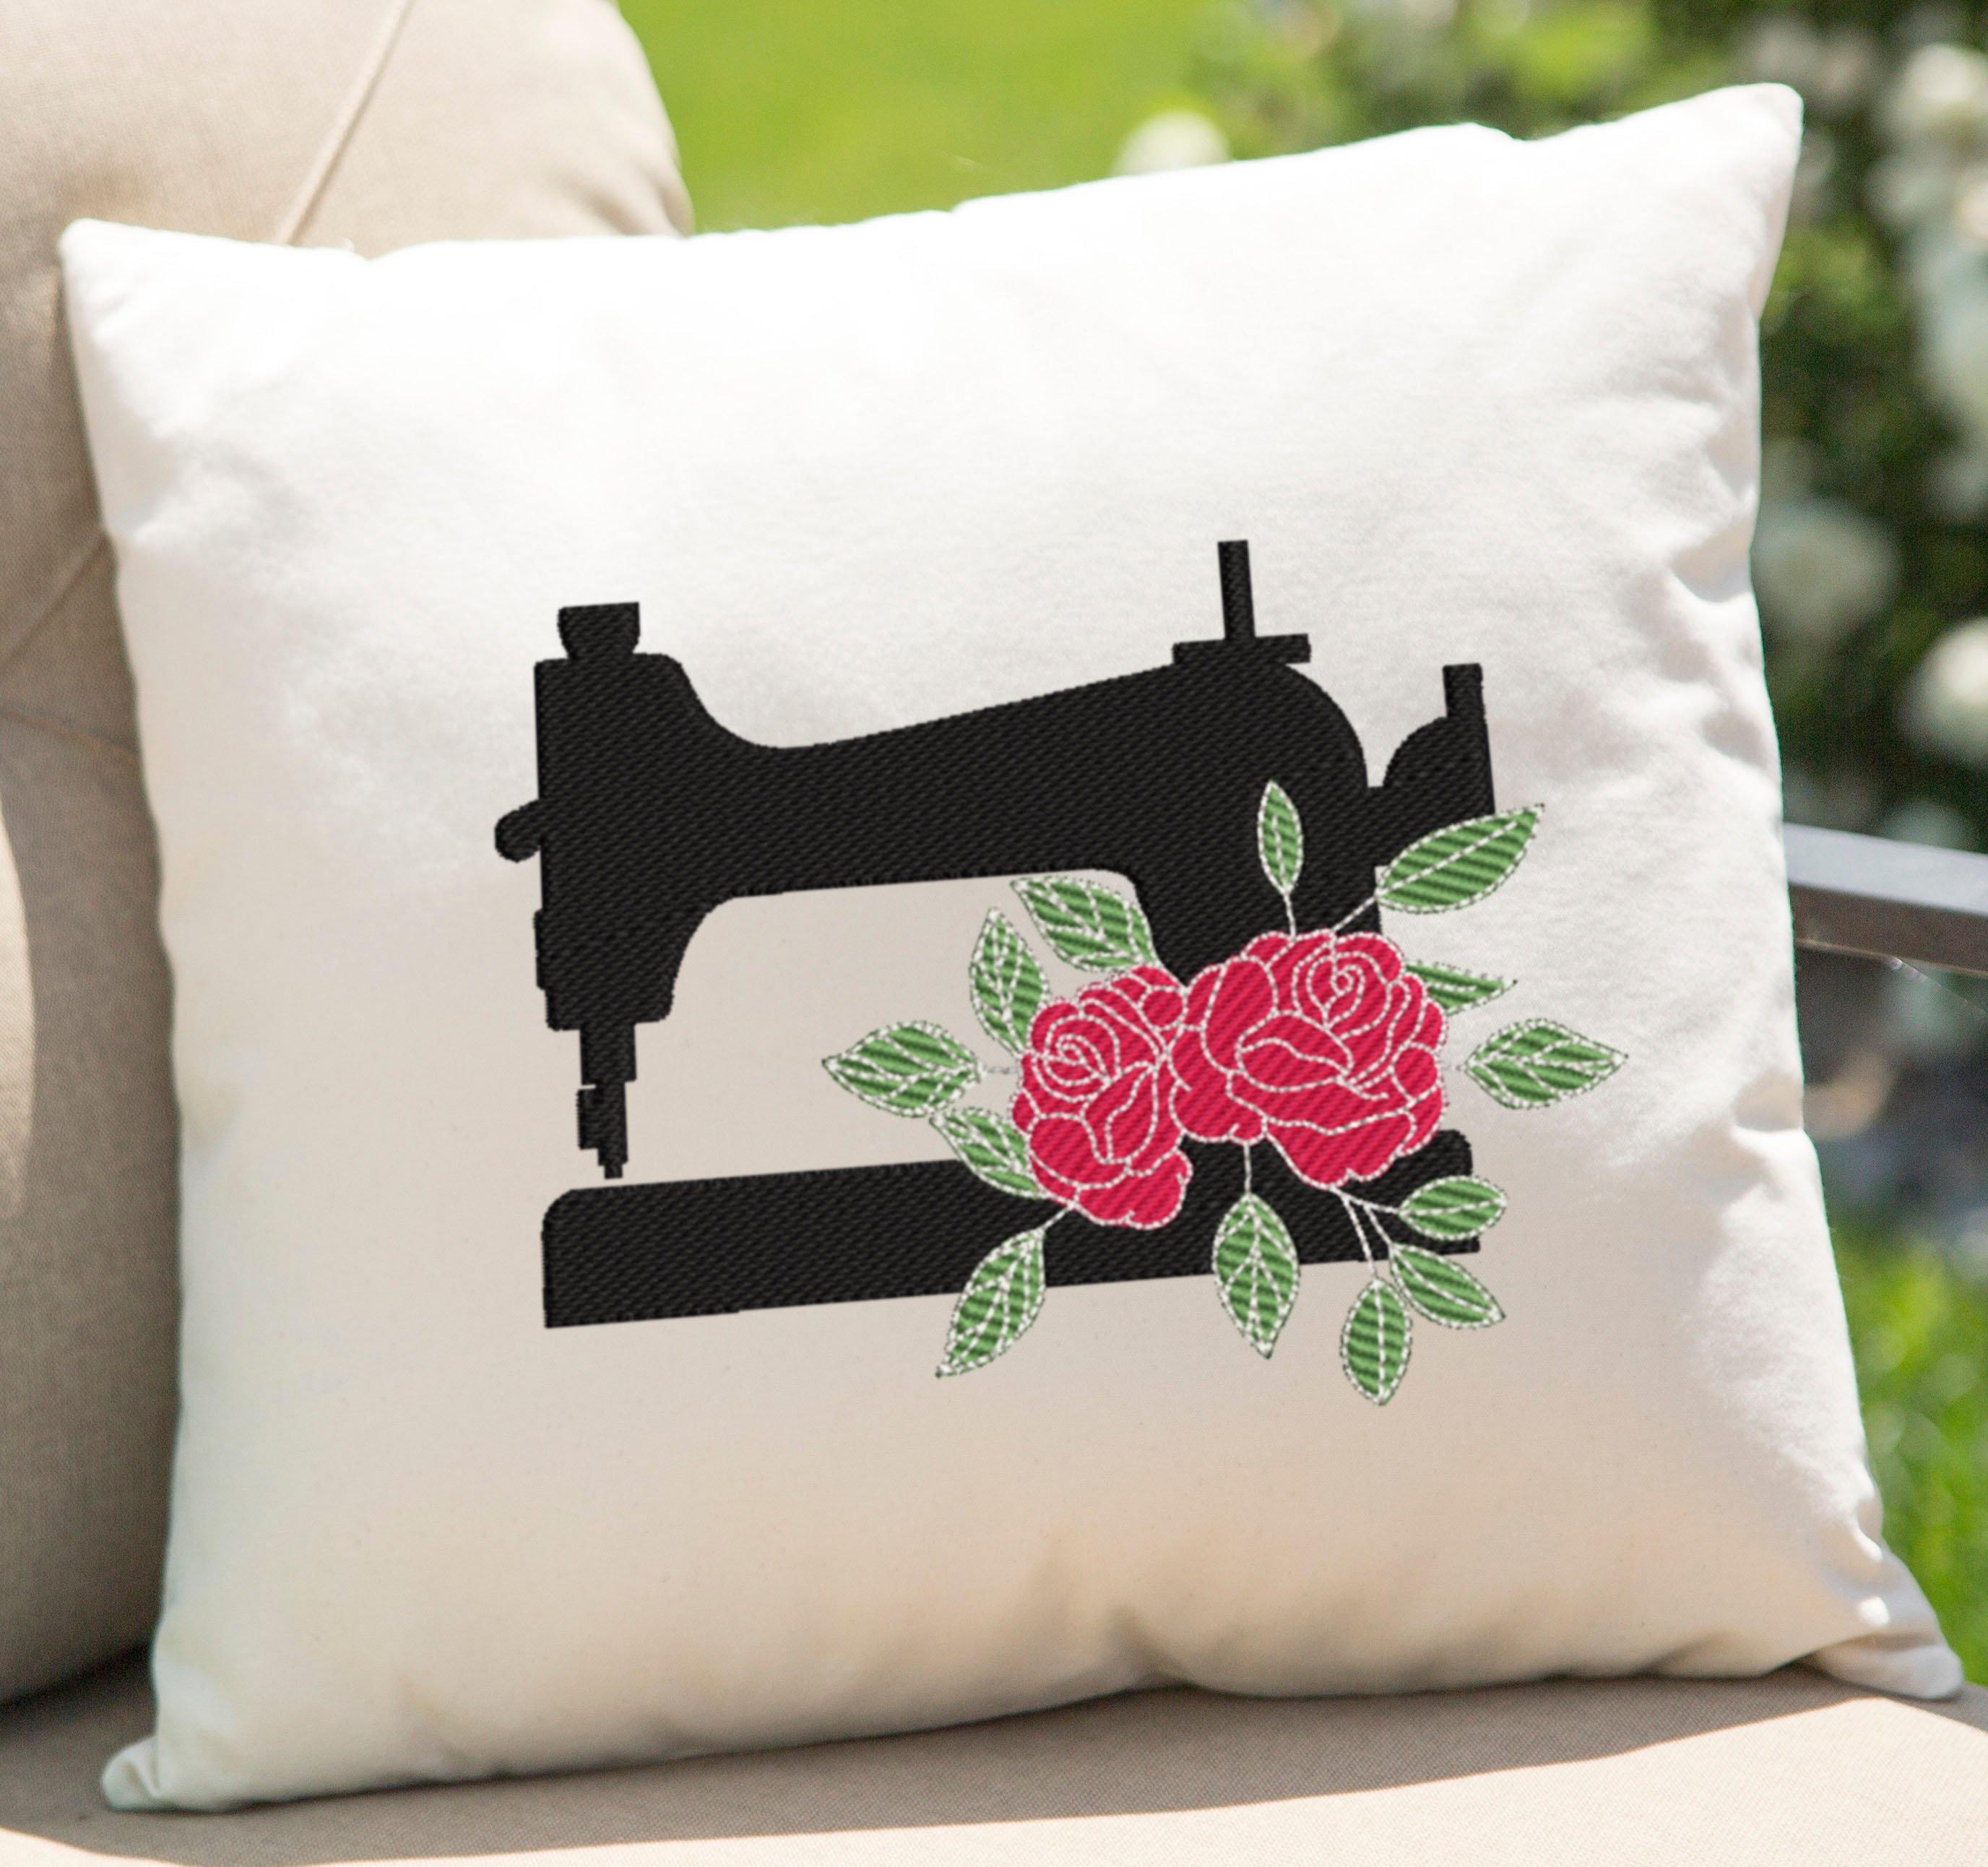 Silhouette Floral Sewing Machine Embroidery Design - Oh My Crafty Supplies Inc.